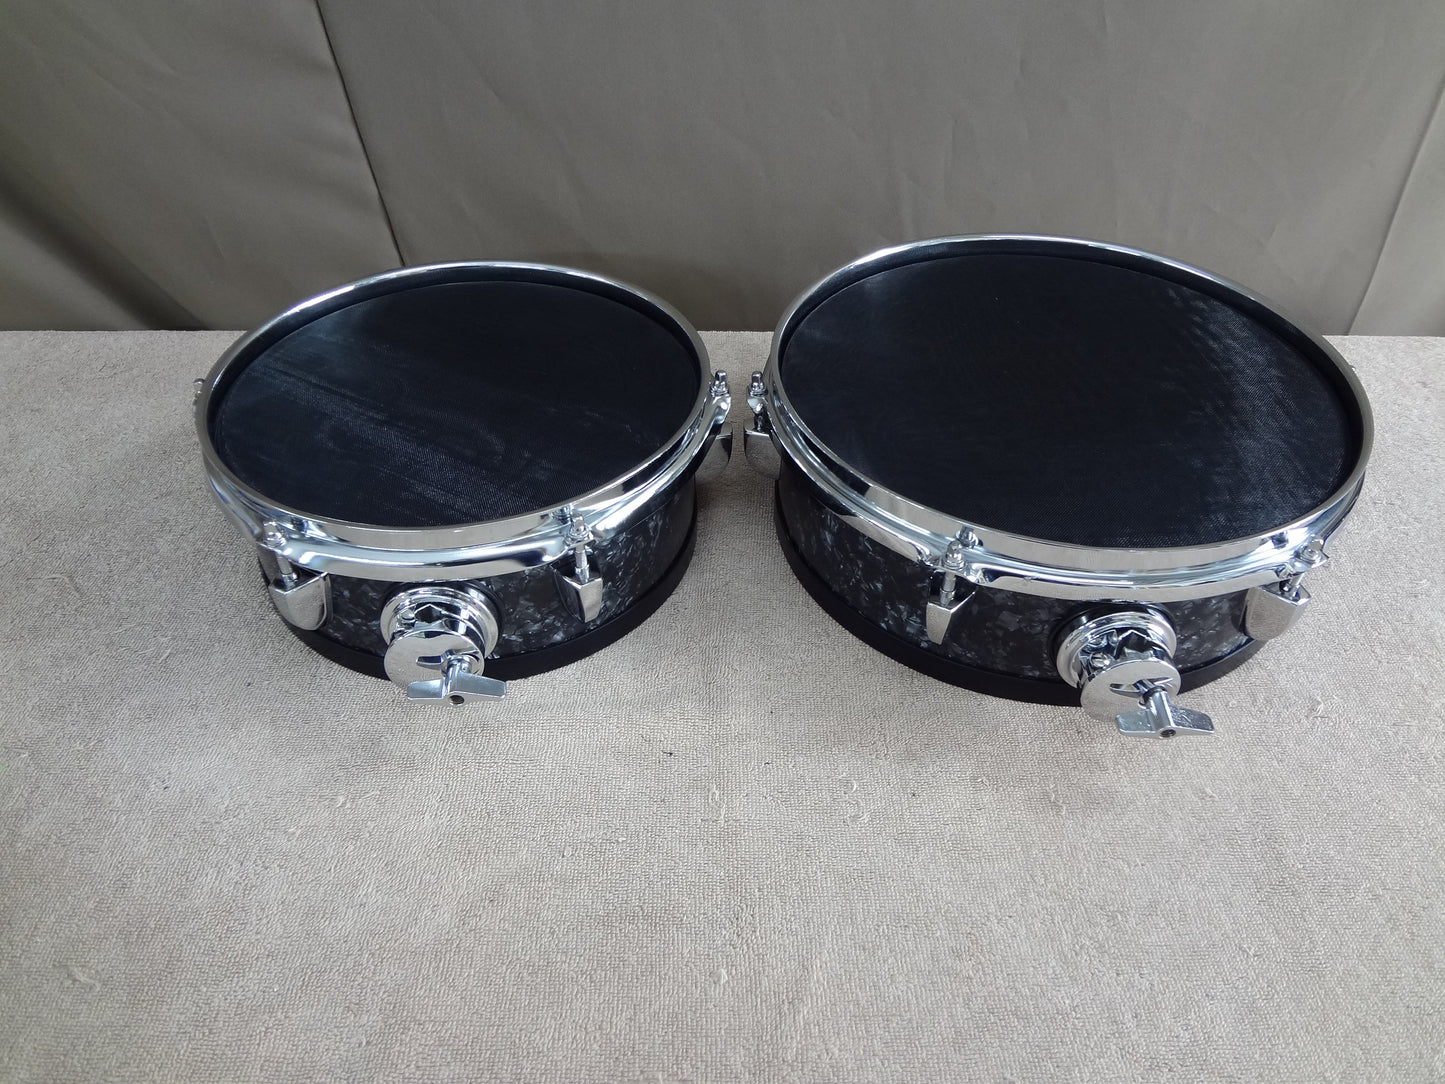 NEW 4 PIECE CUSTOM ELECTRONIC DRUM SHELL PACK - BLACK PEARL